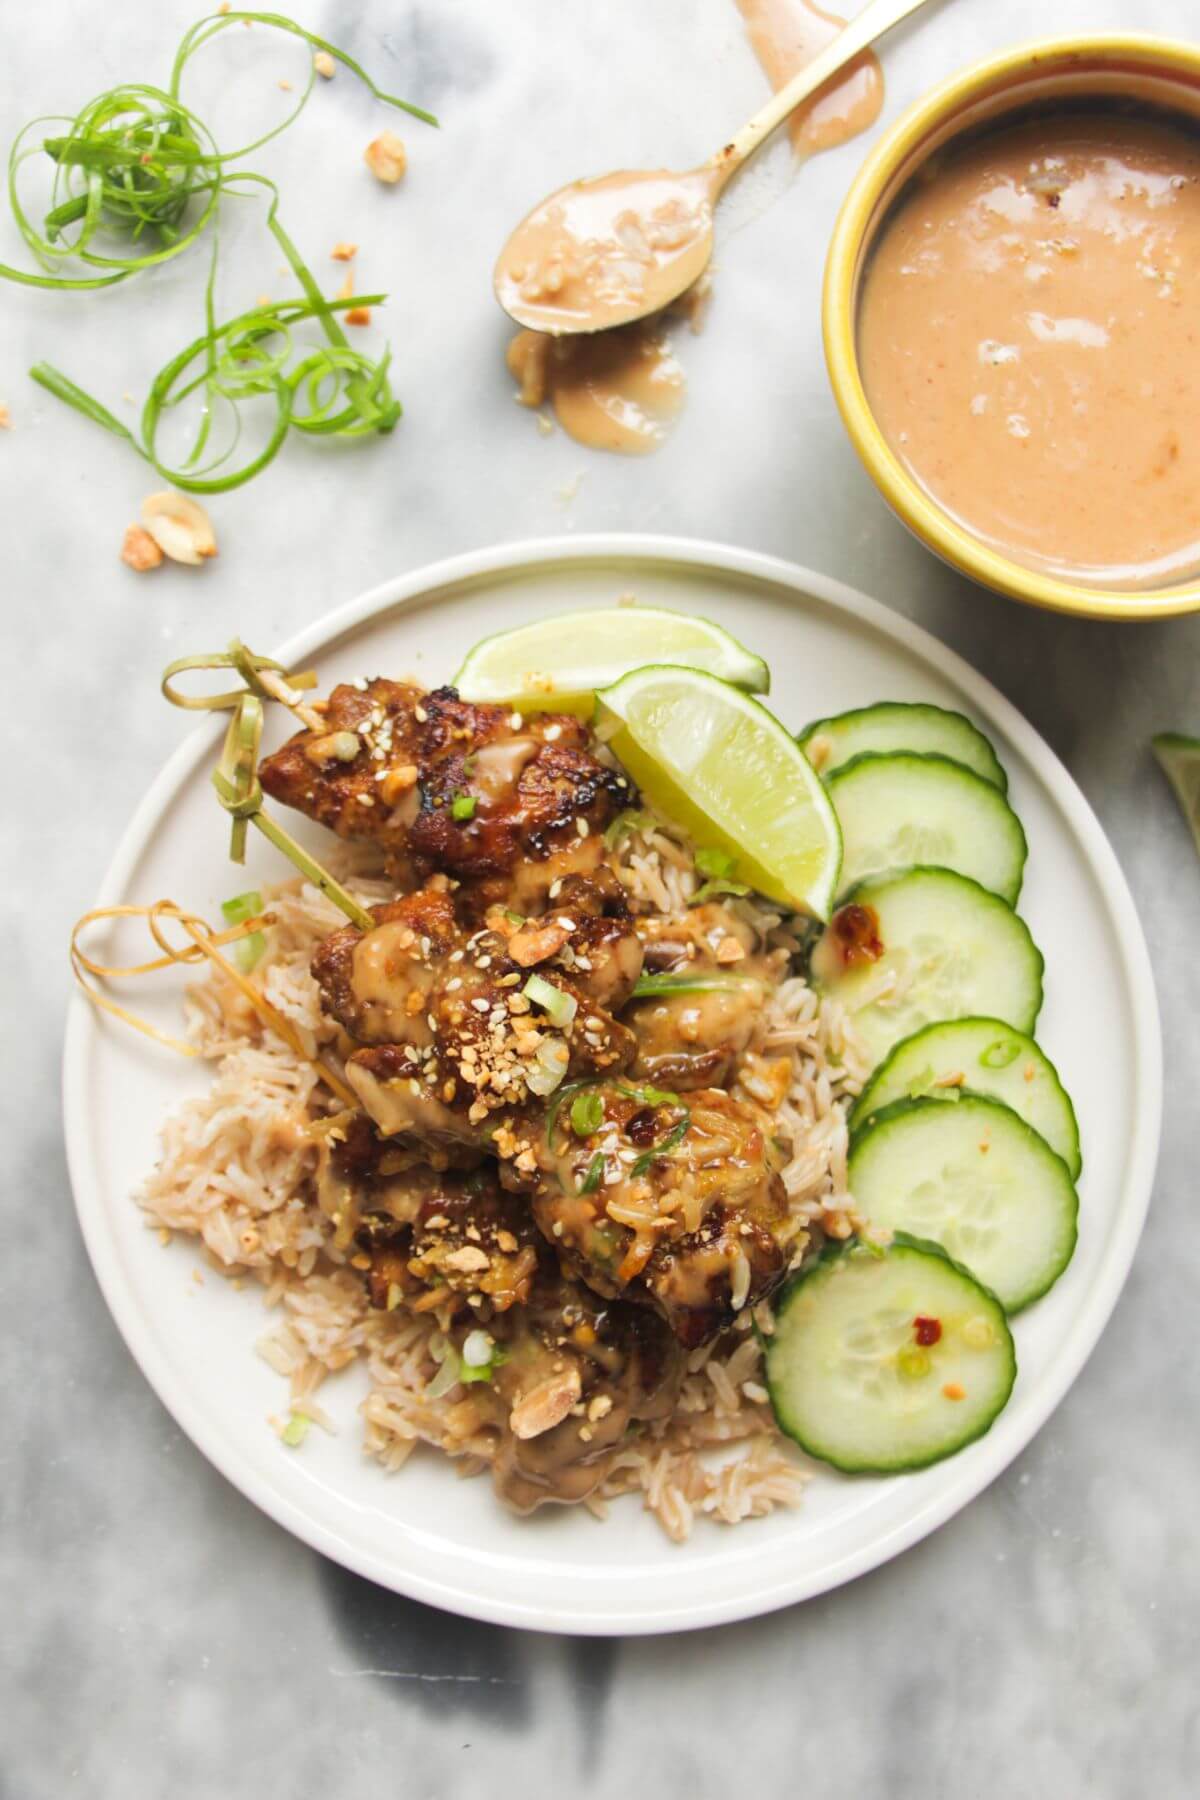 Chicken satay skewers on rice with cucumber slices on the side, with a small bowl of satay peanut sauce behind.